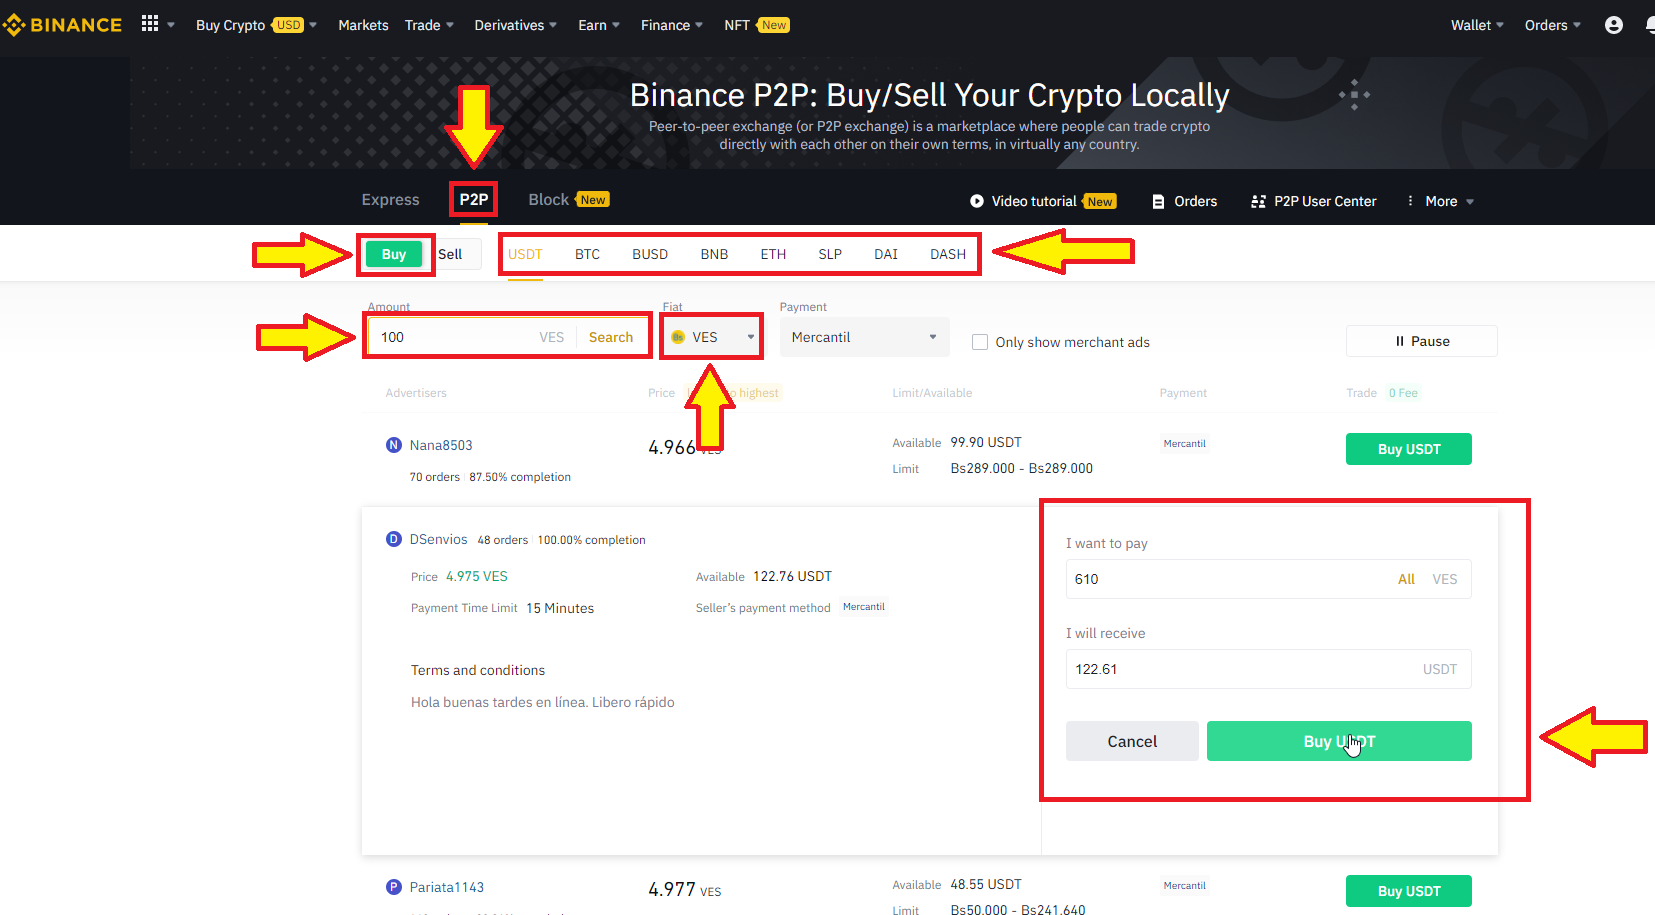 Buy InsaneCoin crypto in P2P with a verified account on Binance